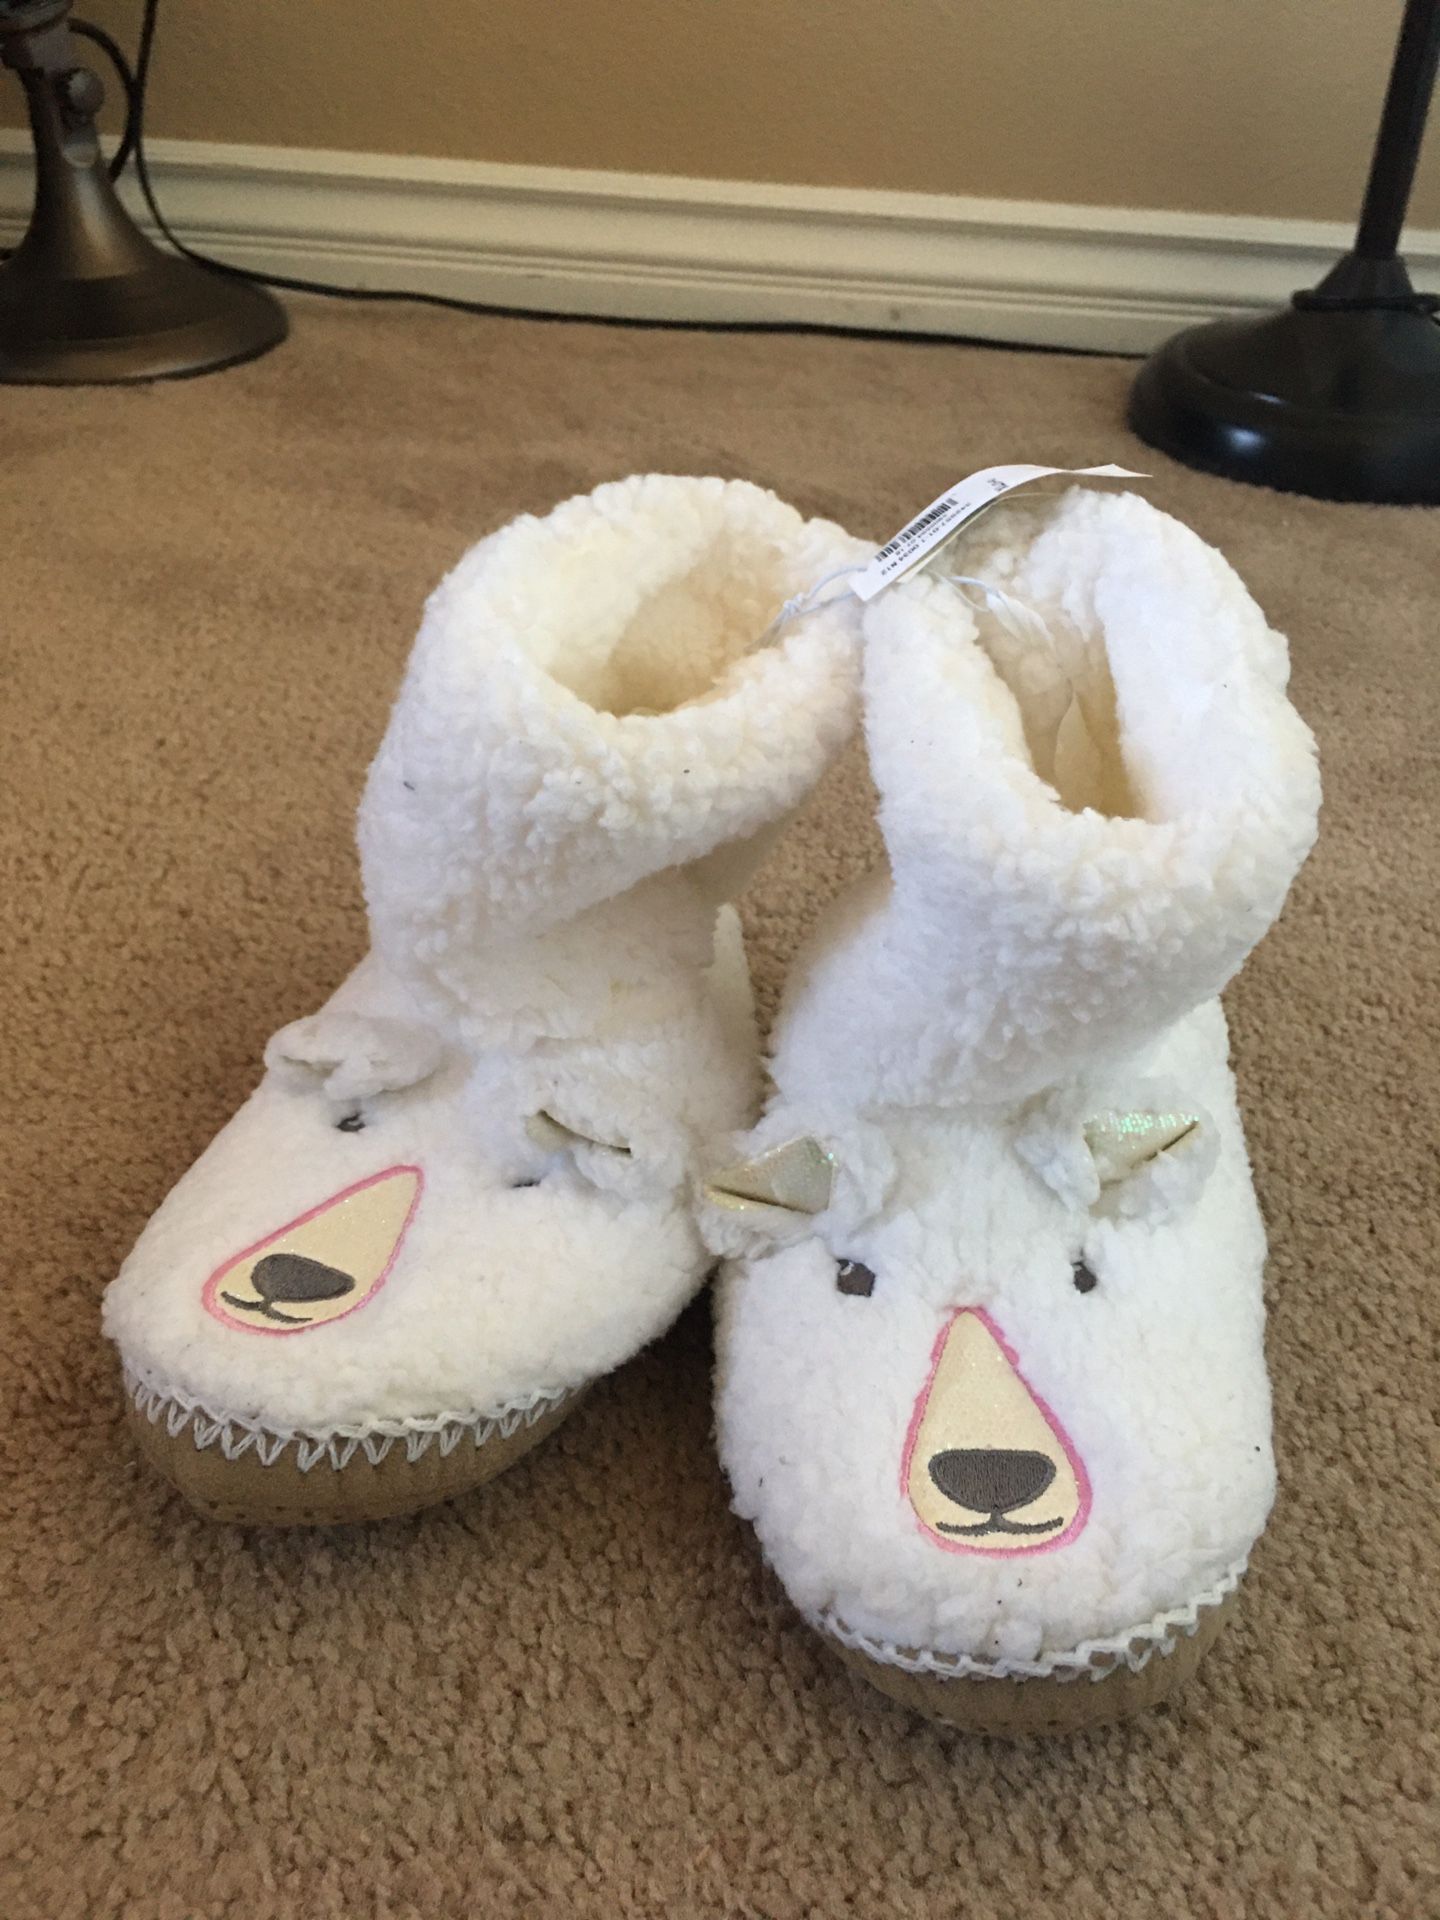 Girls brand new slipper boots shoes size 2-3y